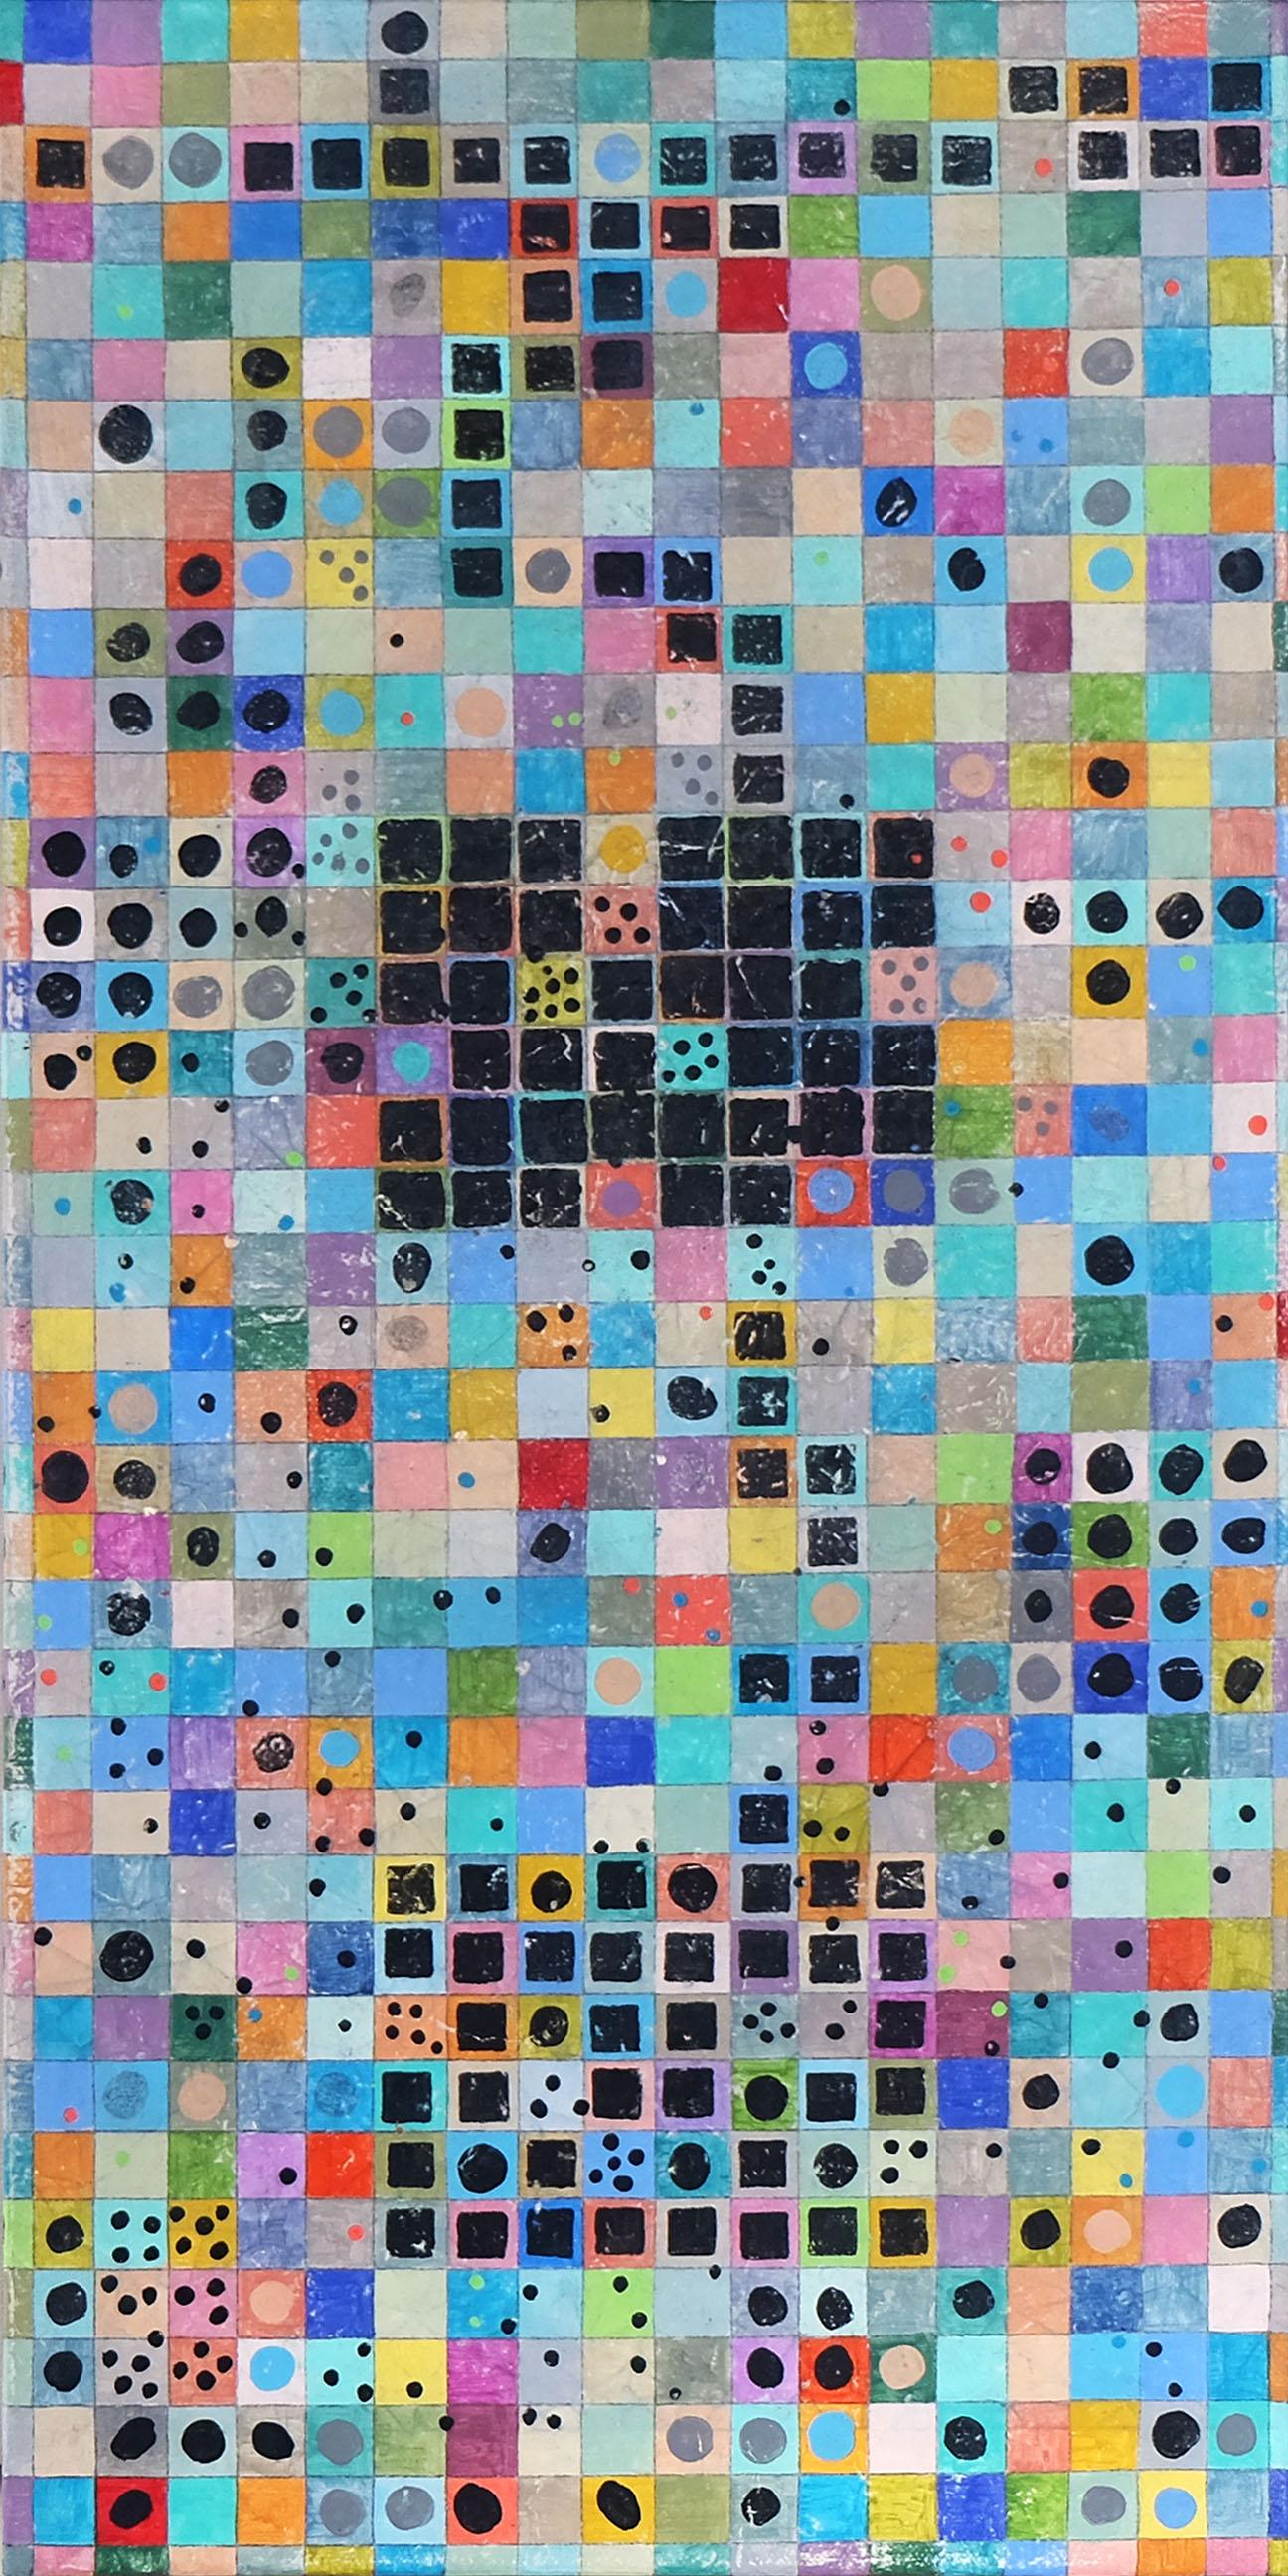 Grid Aesthetic: Diagram 2, Abstract Painting - Mixed Media Art by Terri Bell